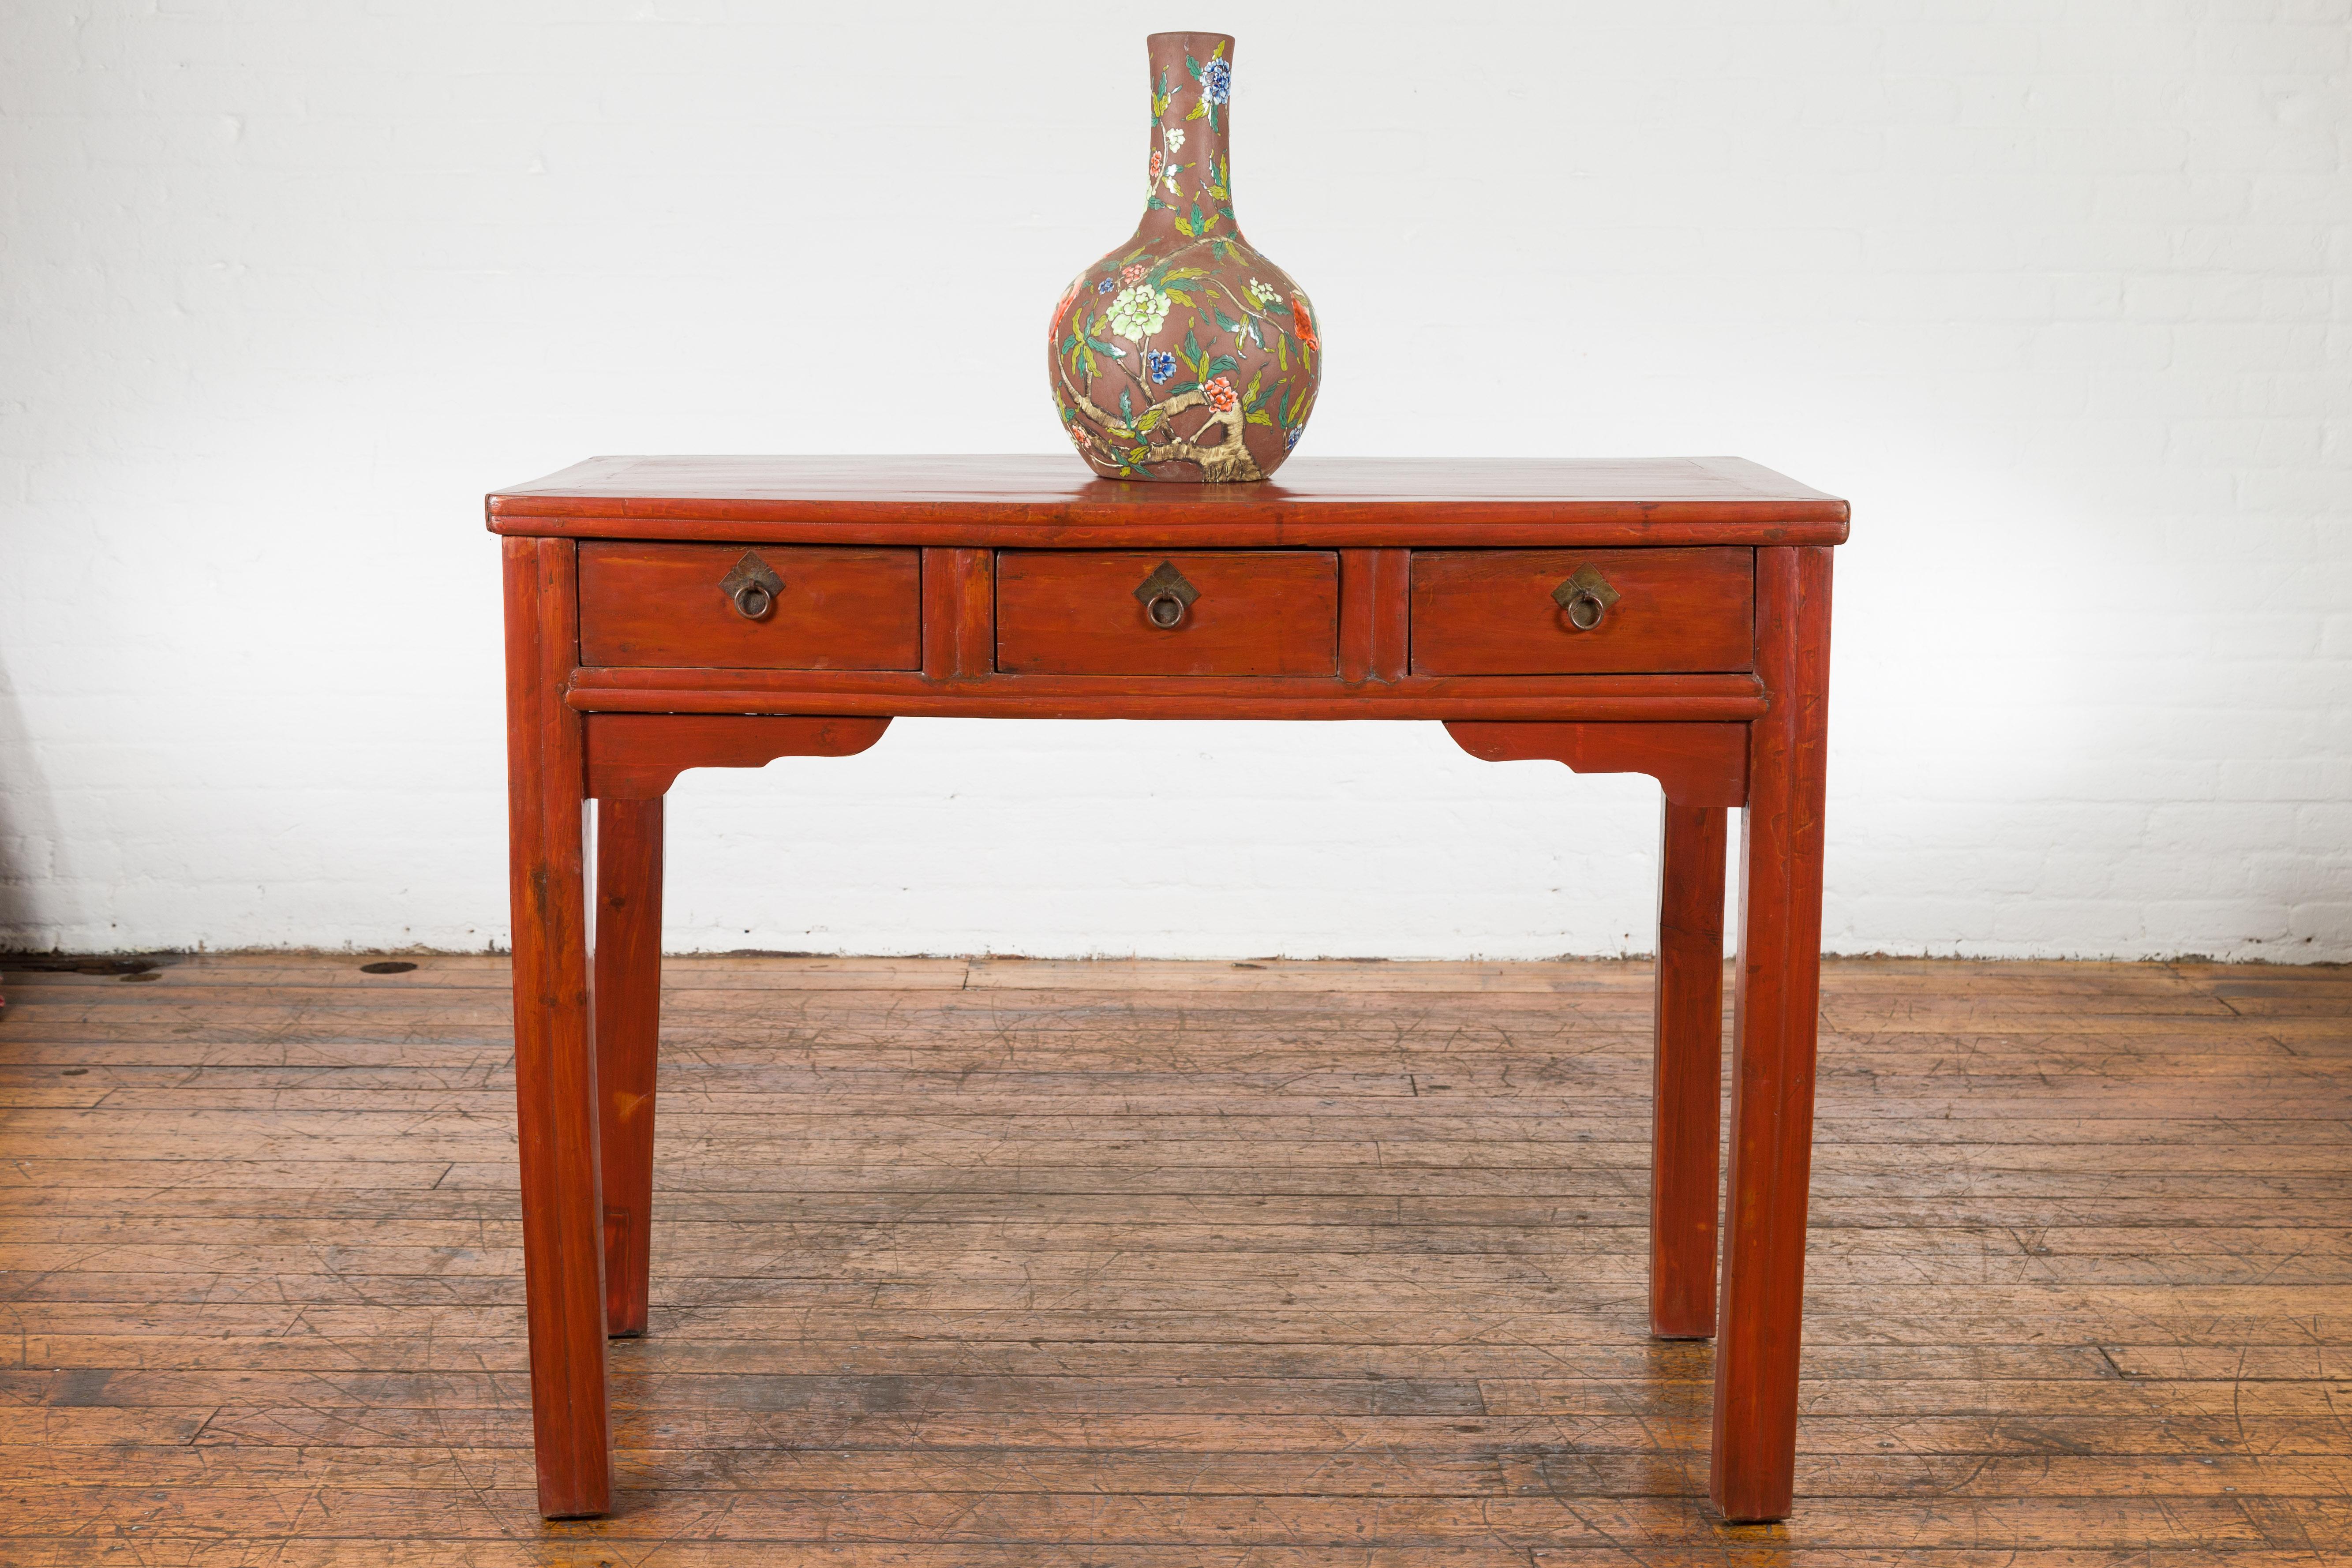 Chinese Qing Dynasty 19th Century Red Orange Lacquered Table with Three Drawers In Good Condition For Sale In Yonkers, NY